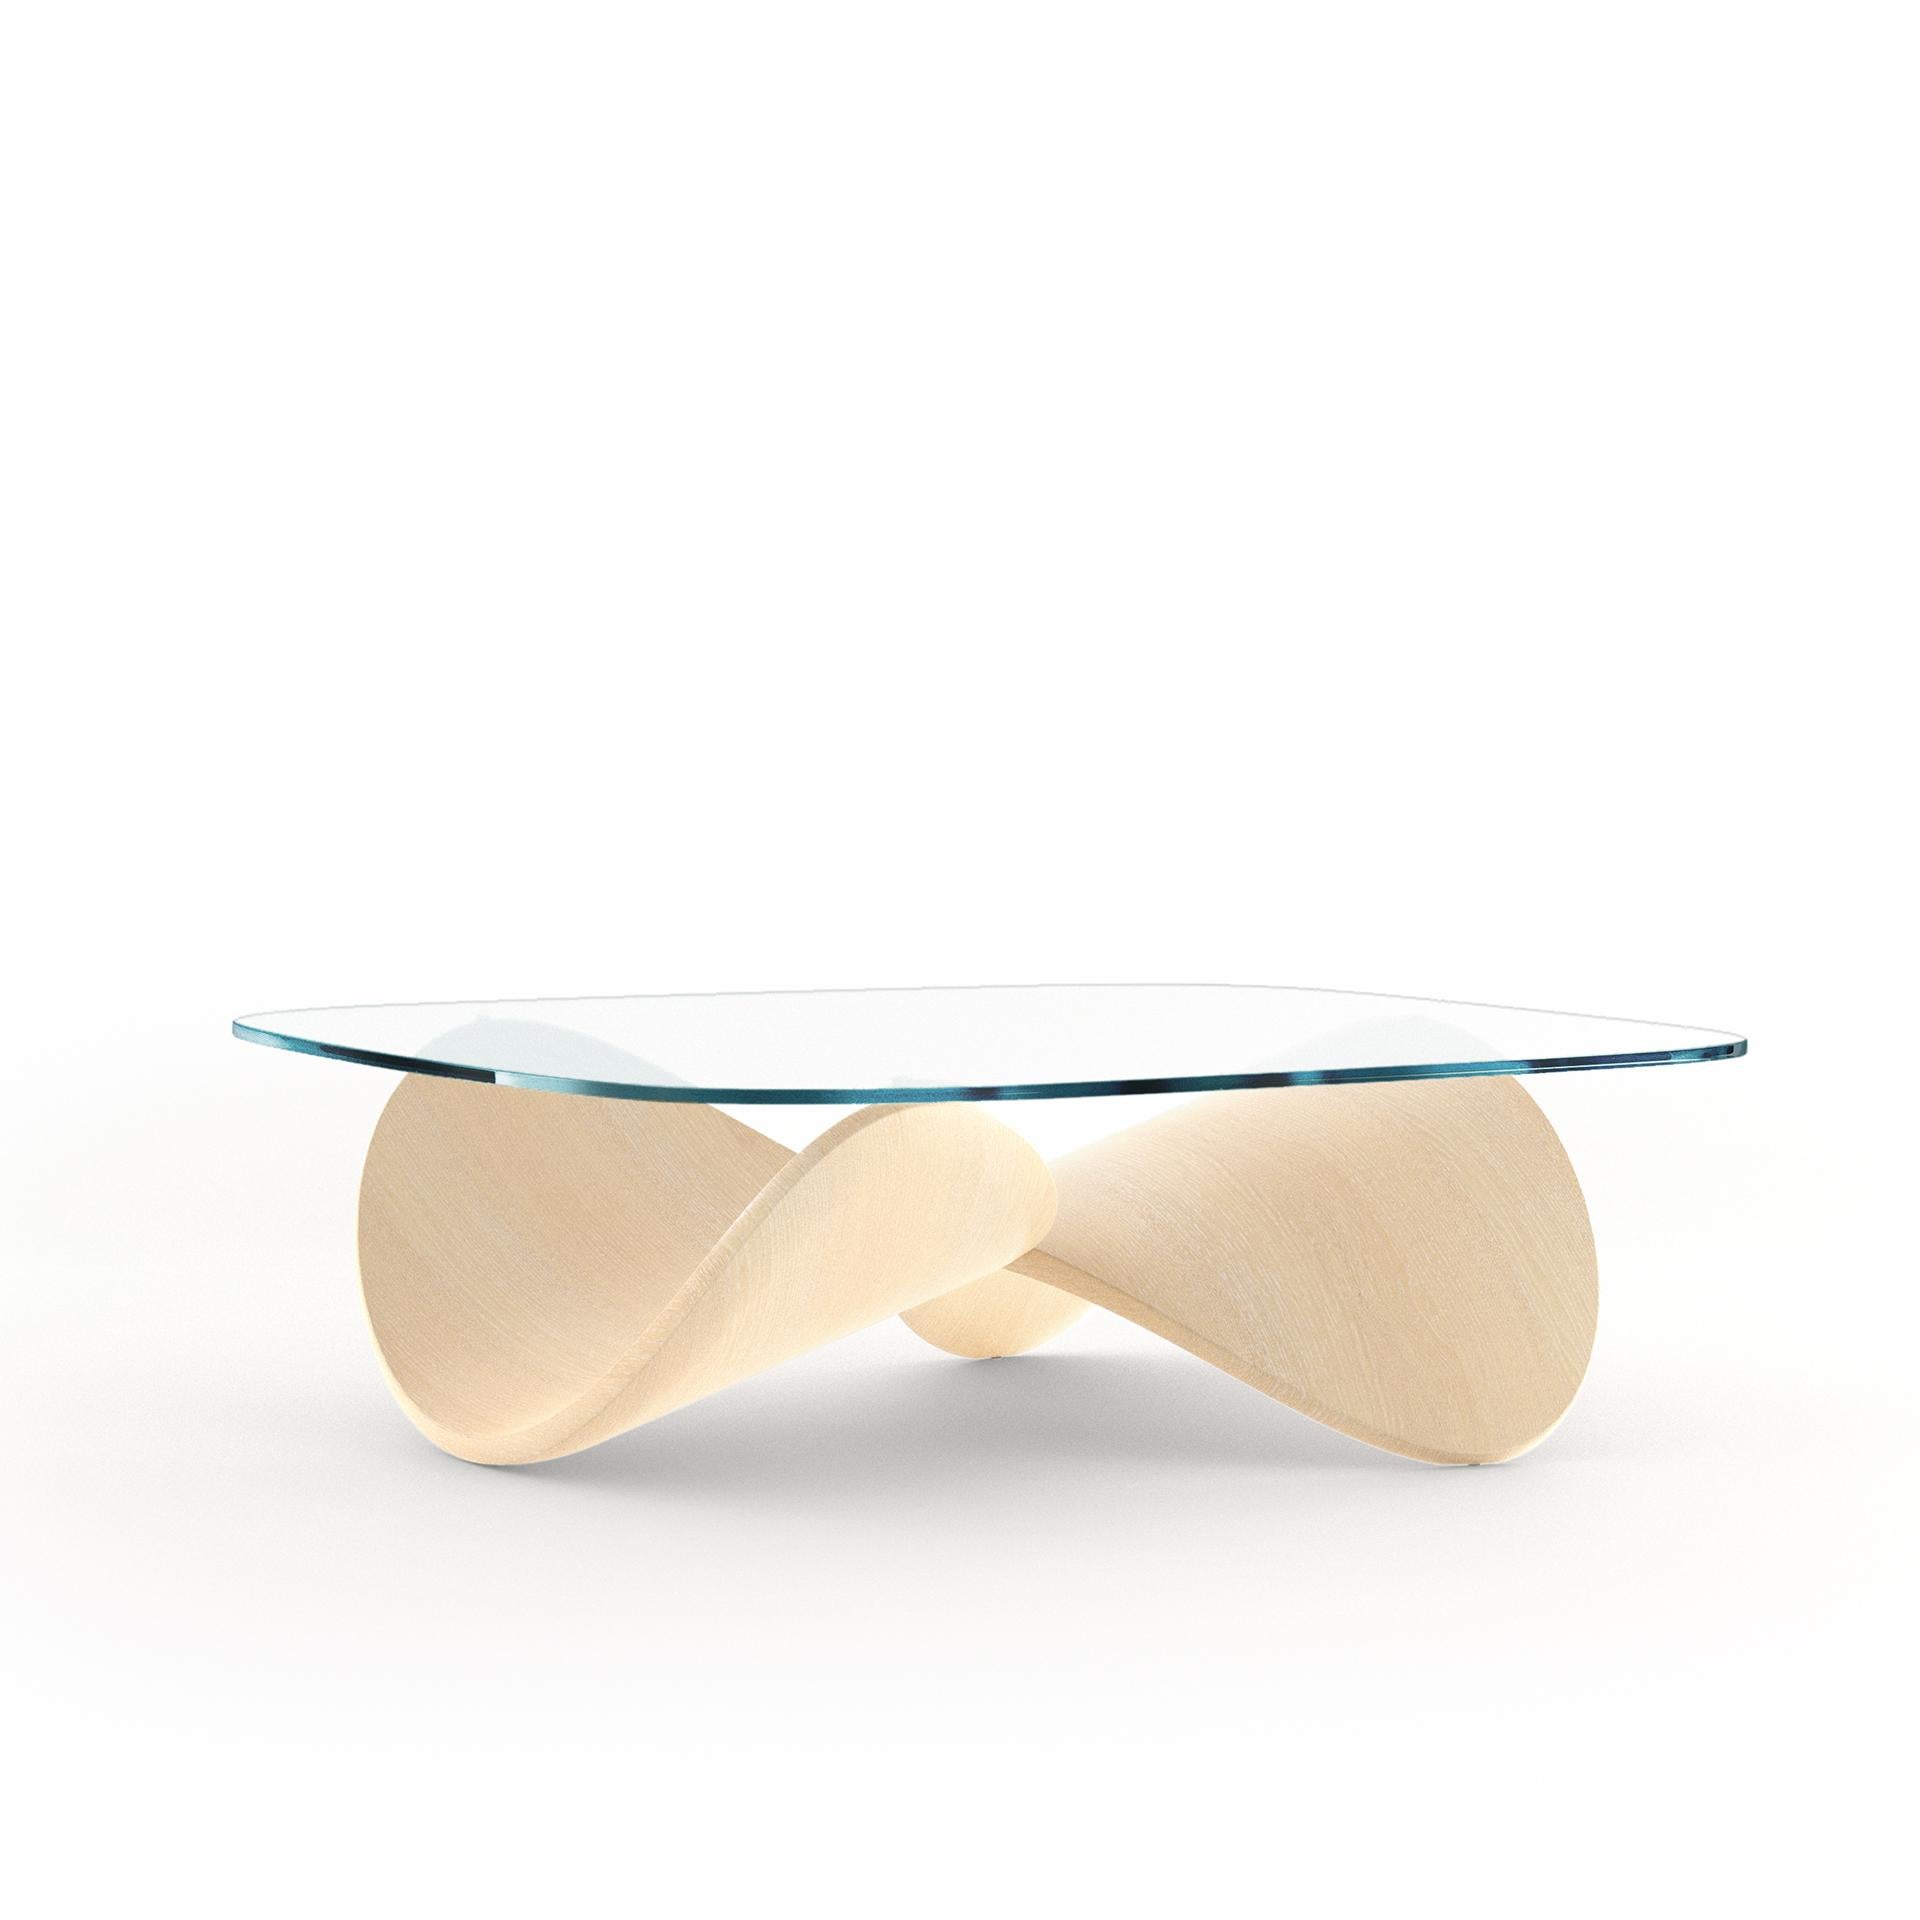 Italian Sandro Lopez's Sculptural Coffee Table in Bent Solid Wood, Natural Ash, Italy For Sale